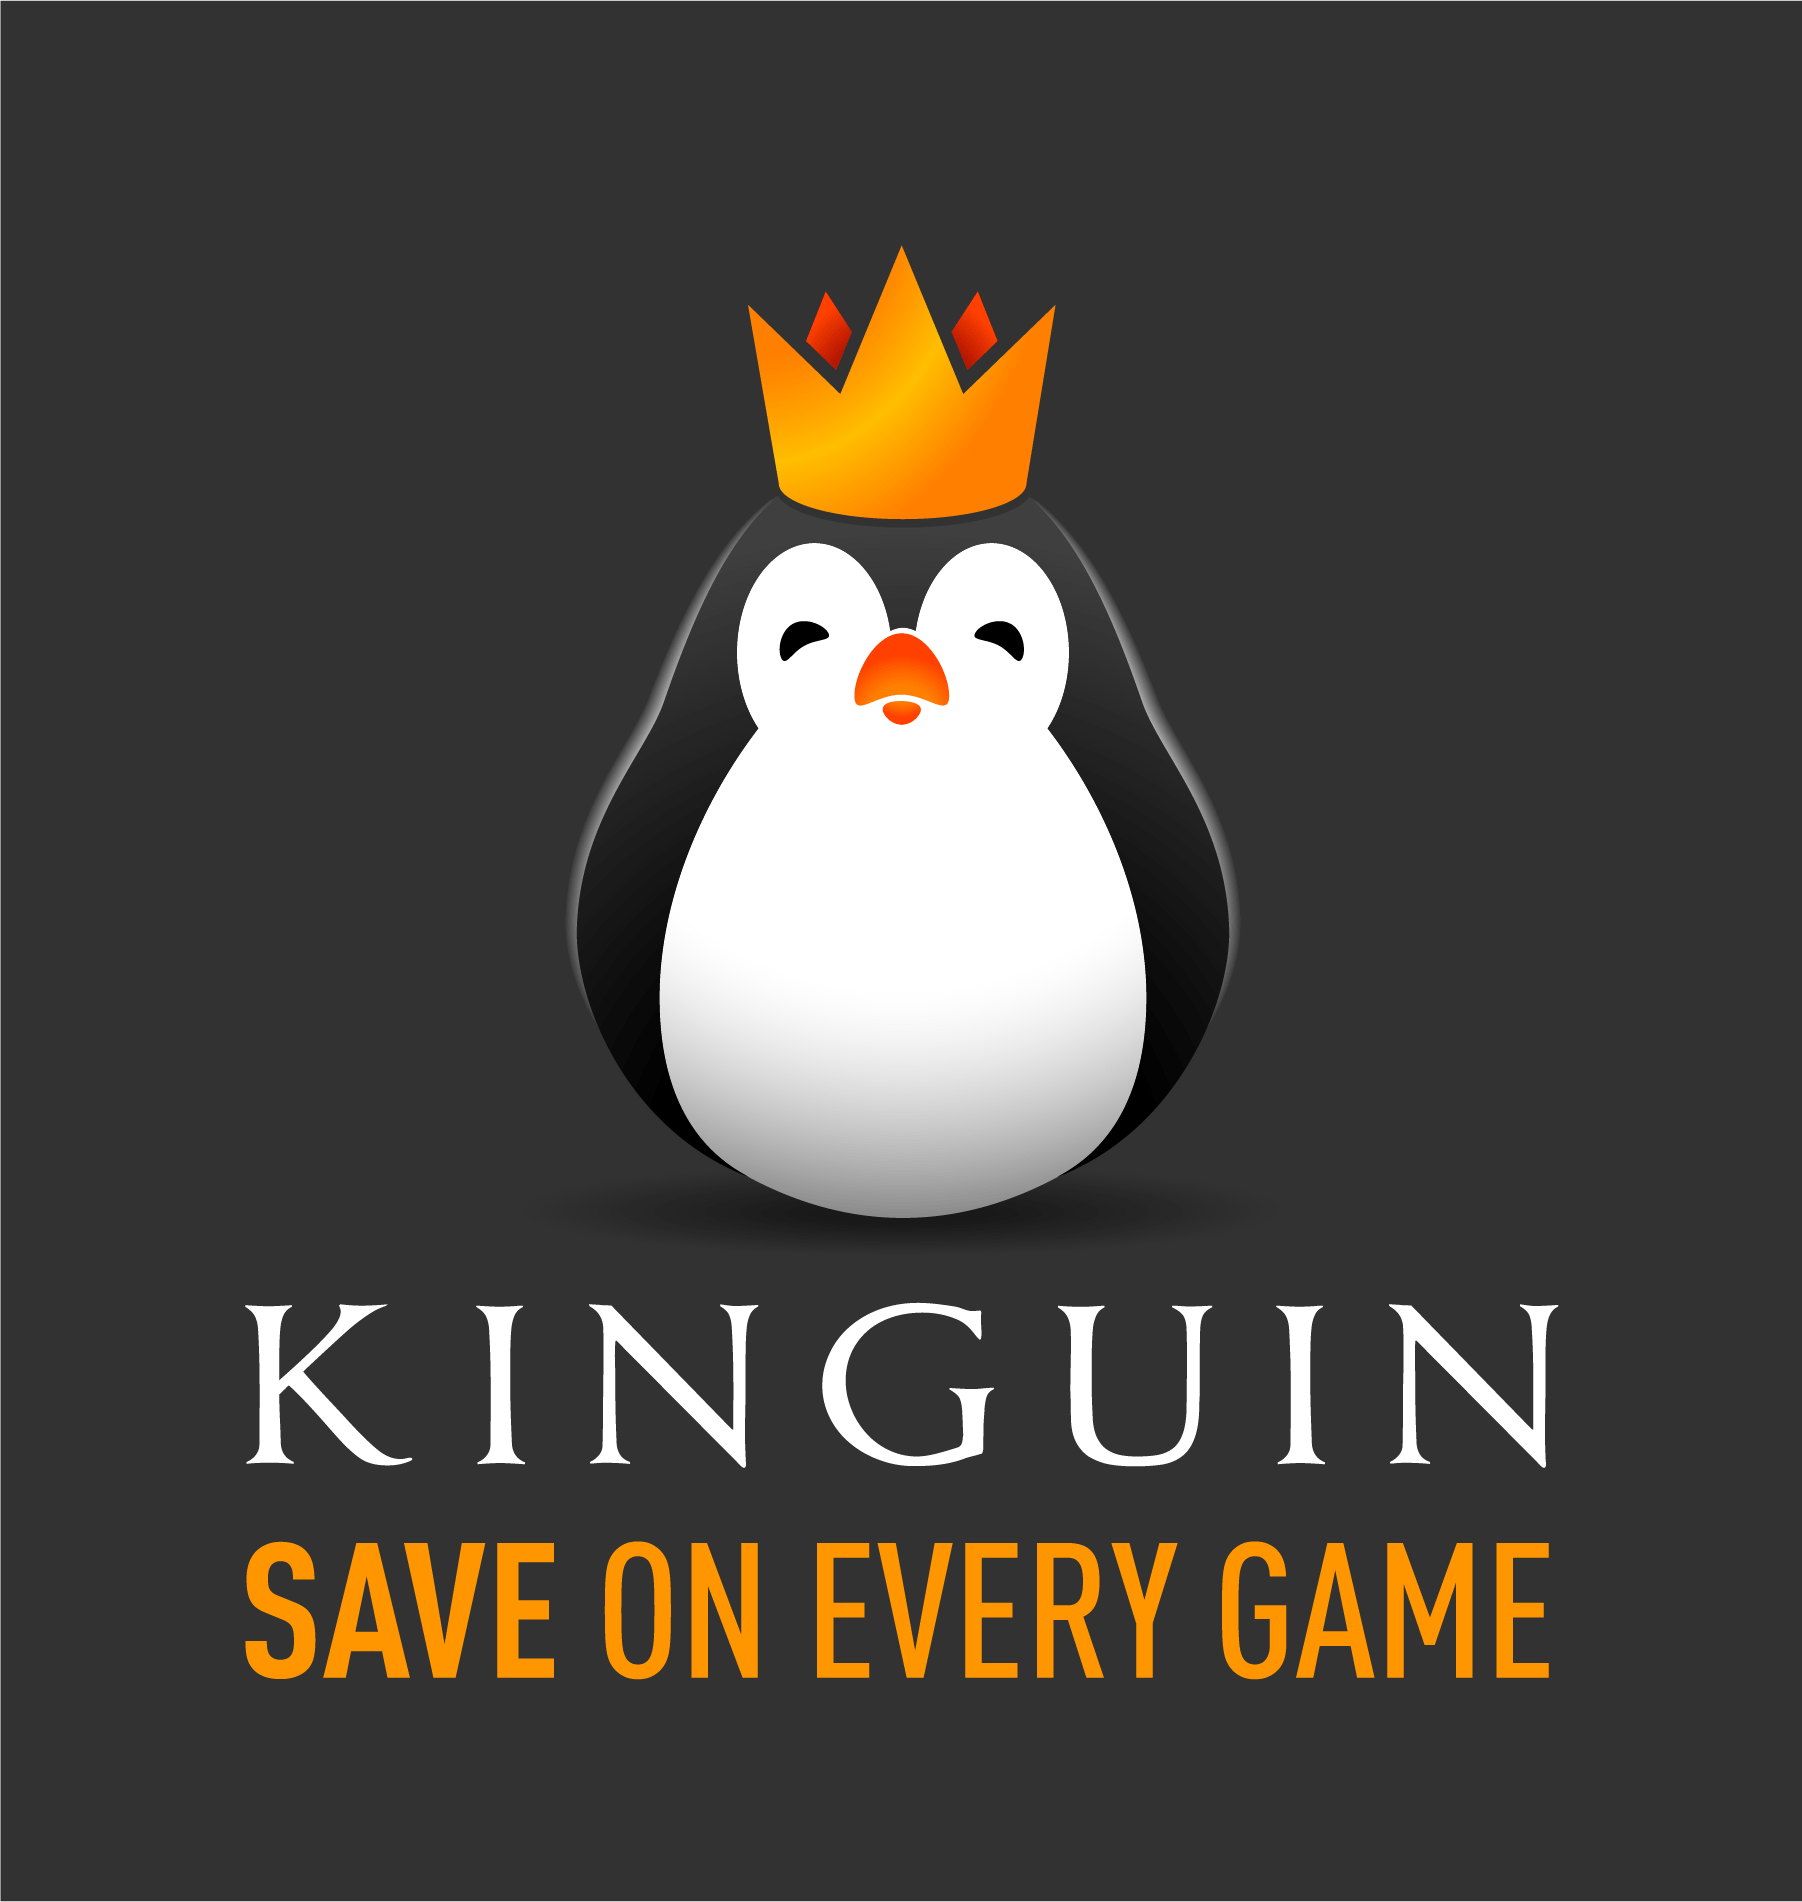 Kinguin - Save on every game